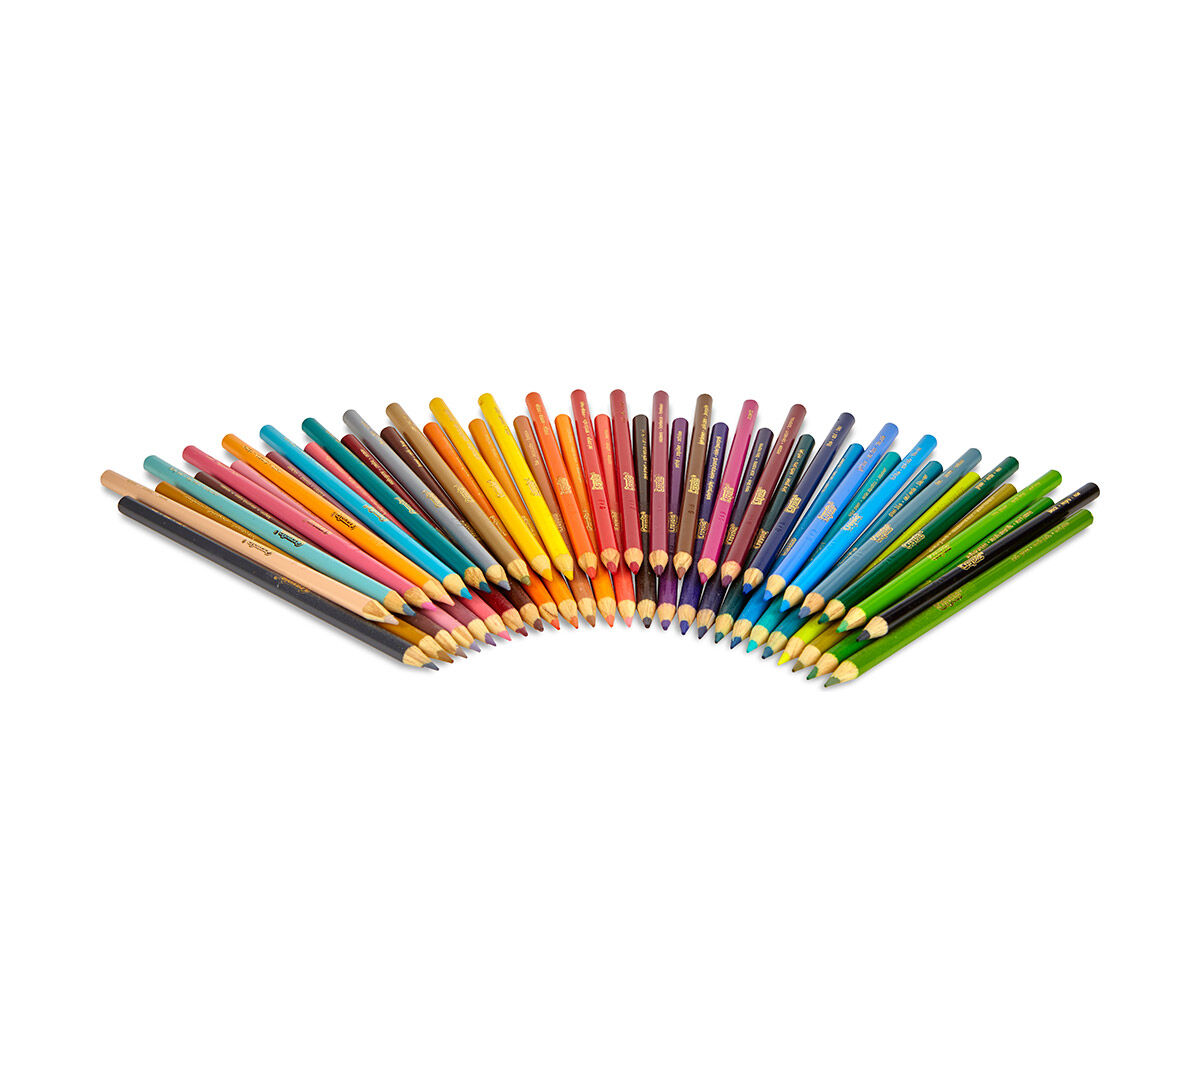 Stocking Stuffer Pre-sharpened 50 Count Crayola Colored Pencils Gift Adult Coloring 